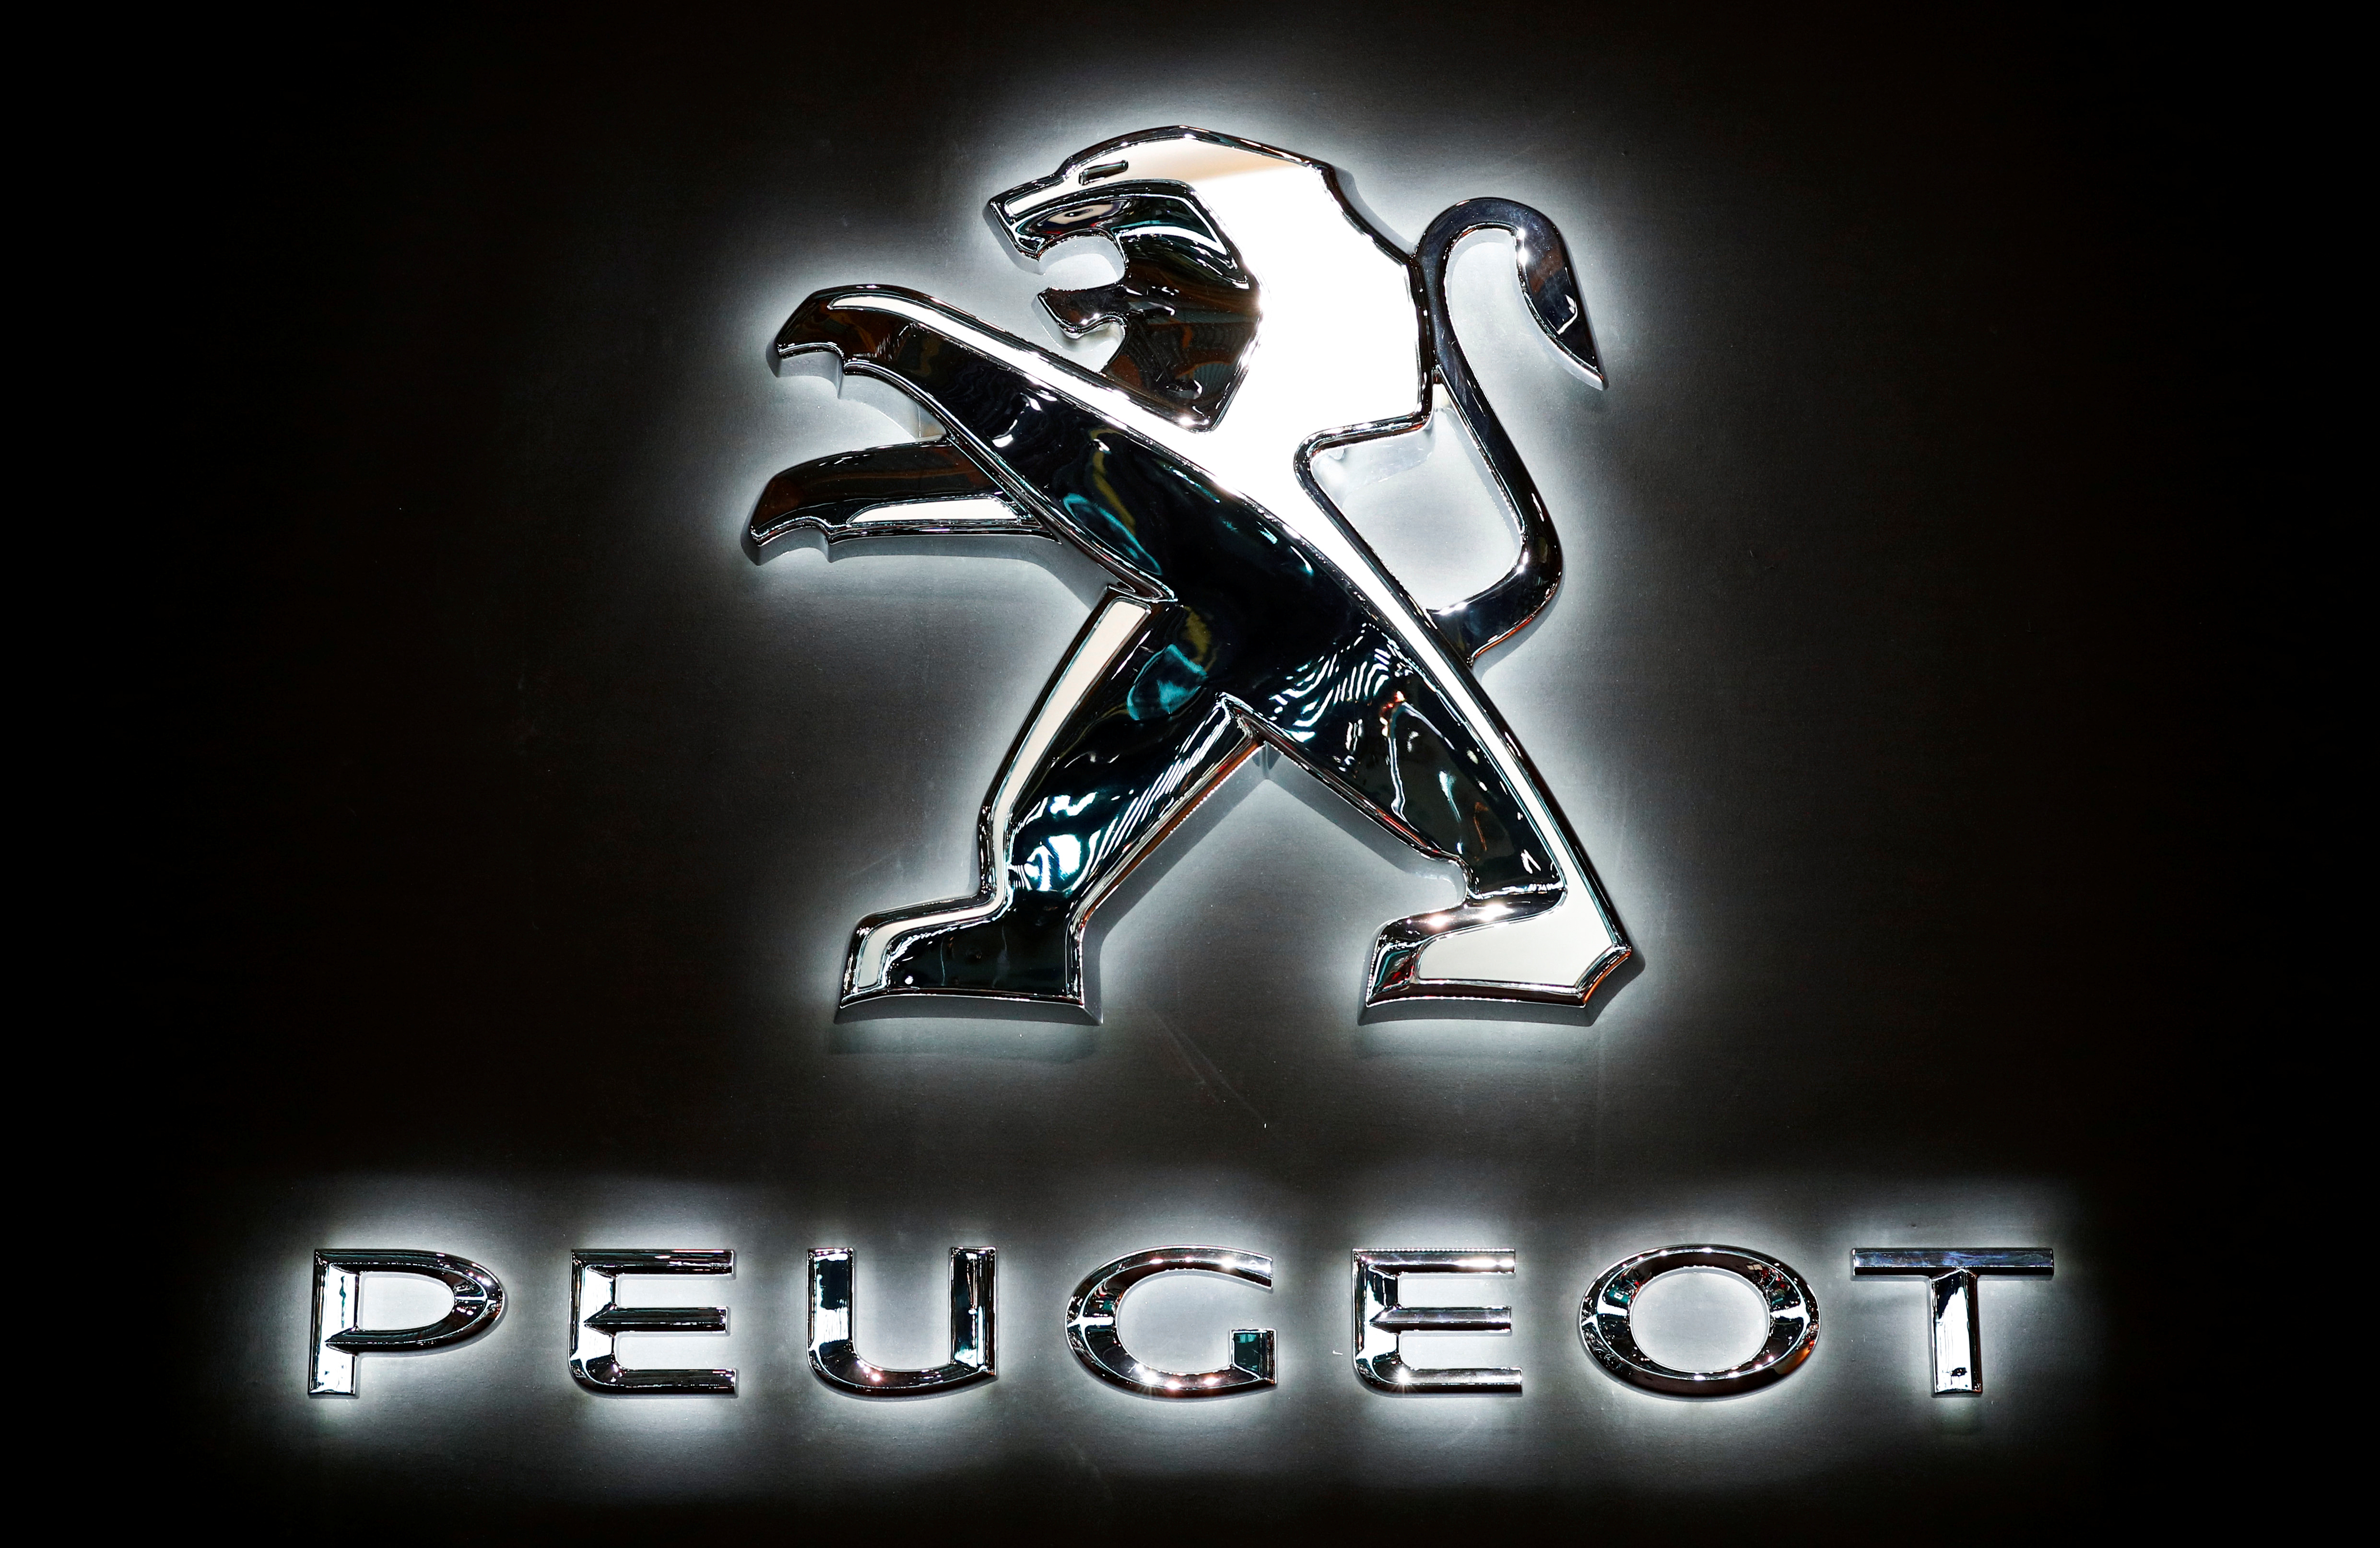 Peugeot CEO says nearly 20% of European sales through August electrified